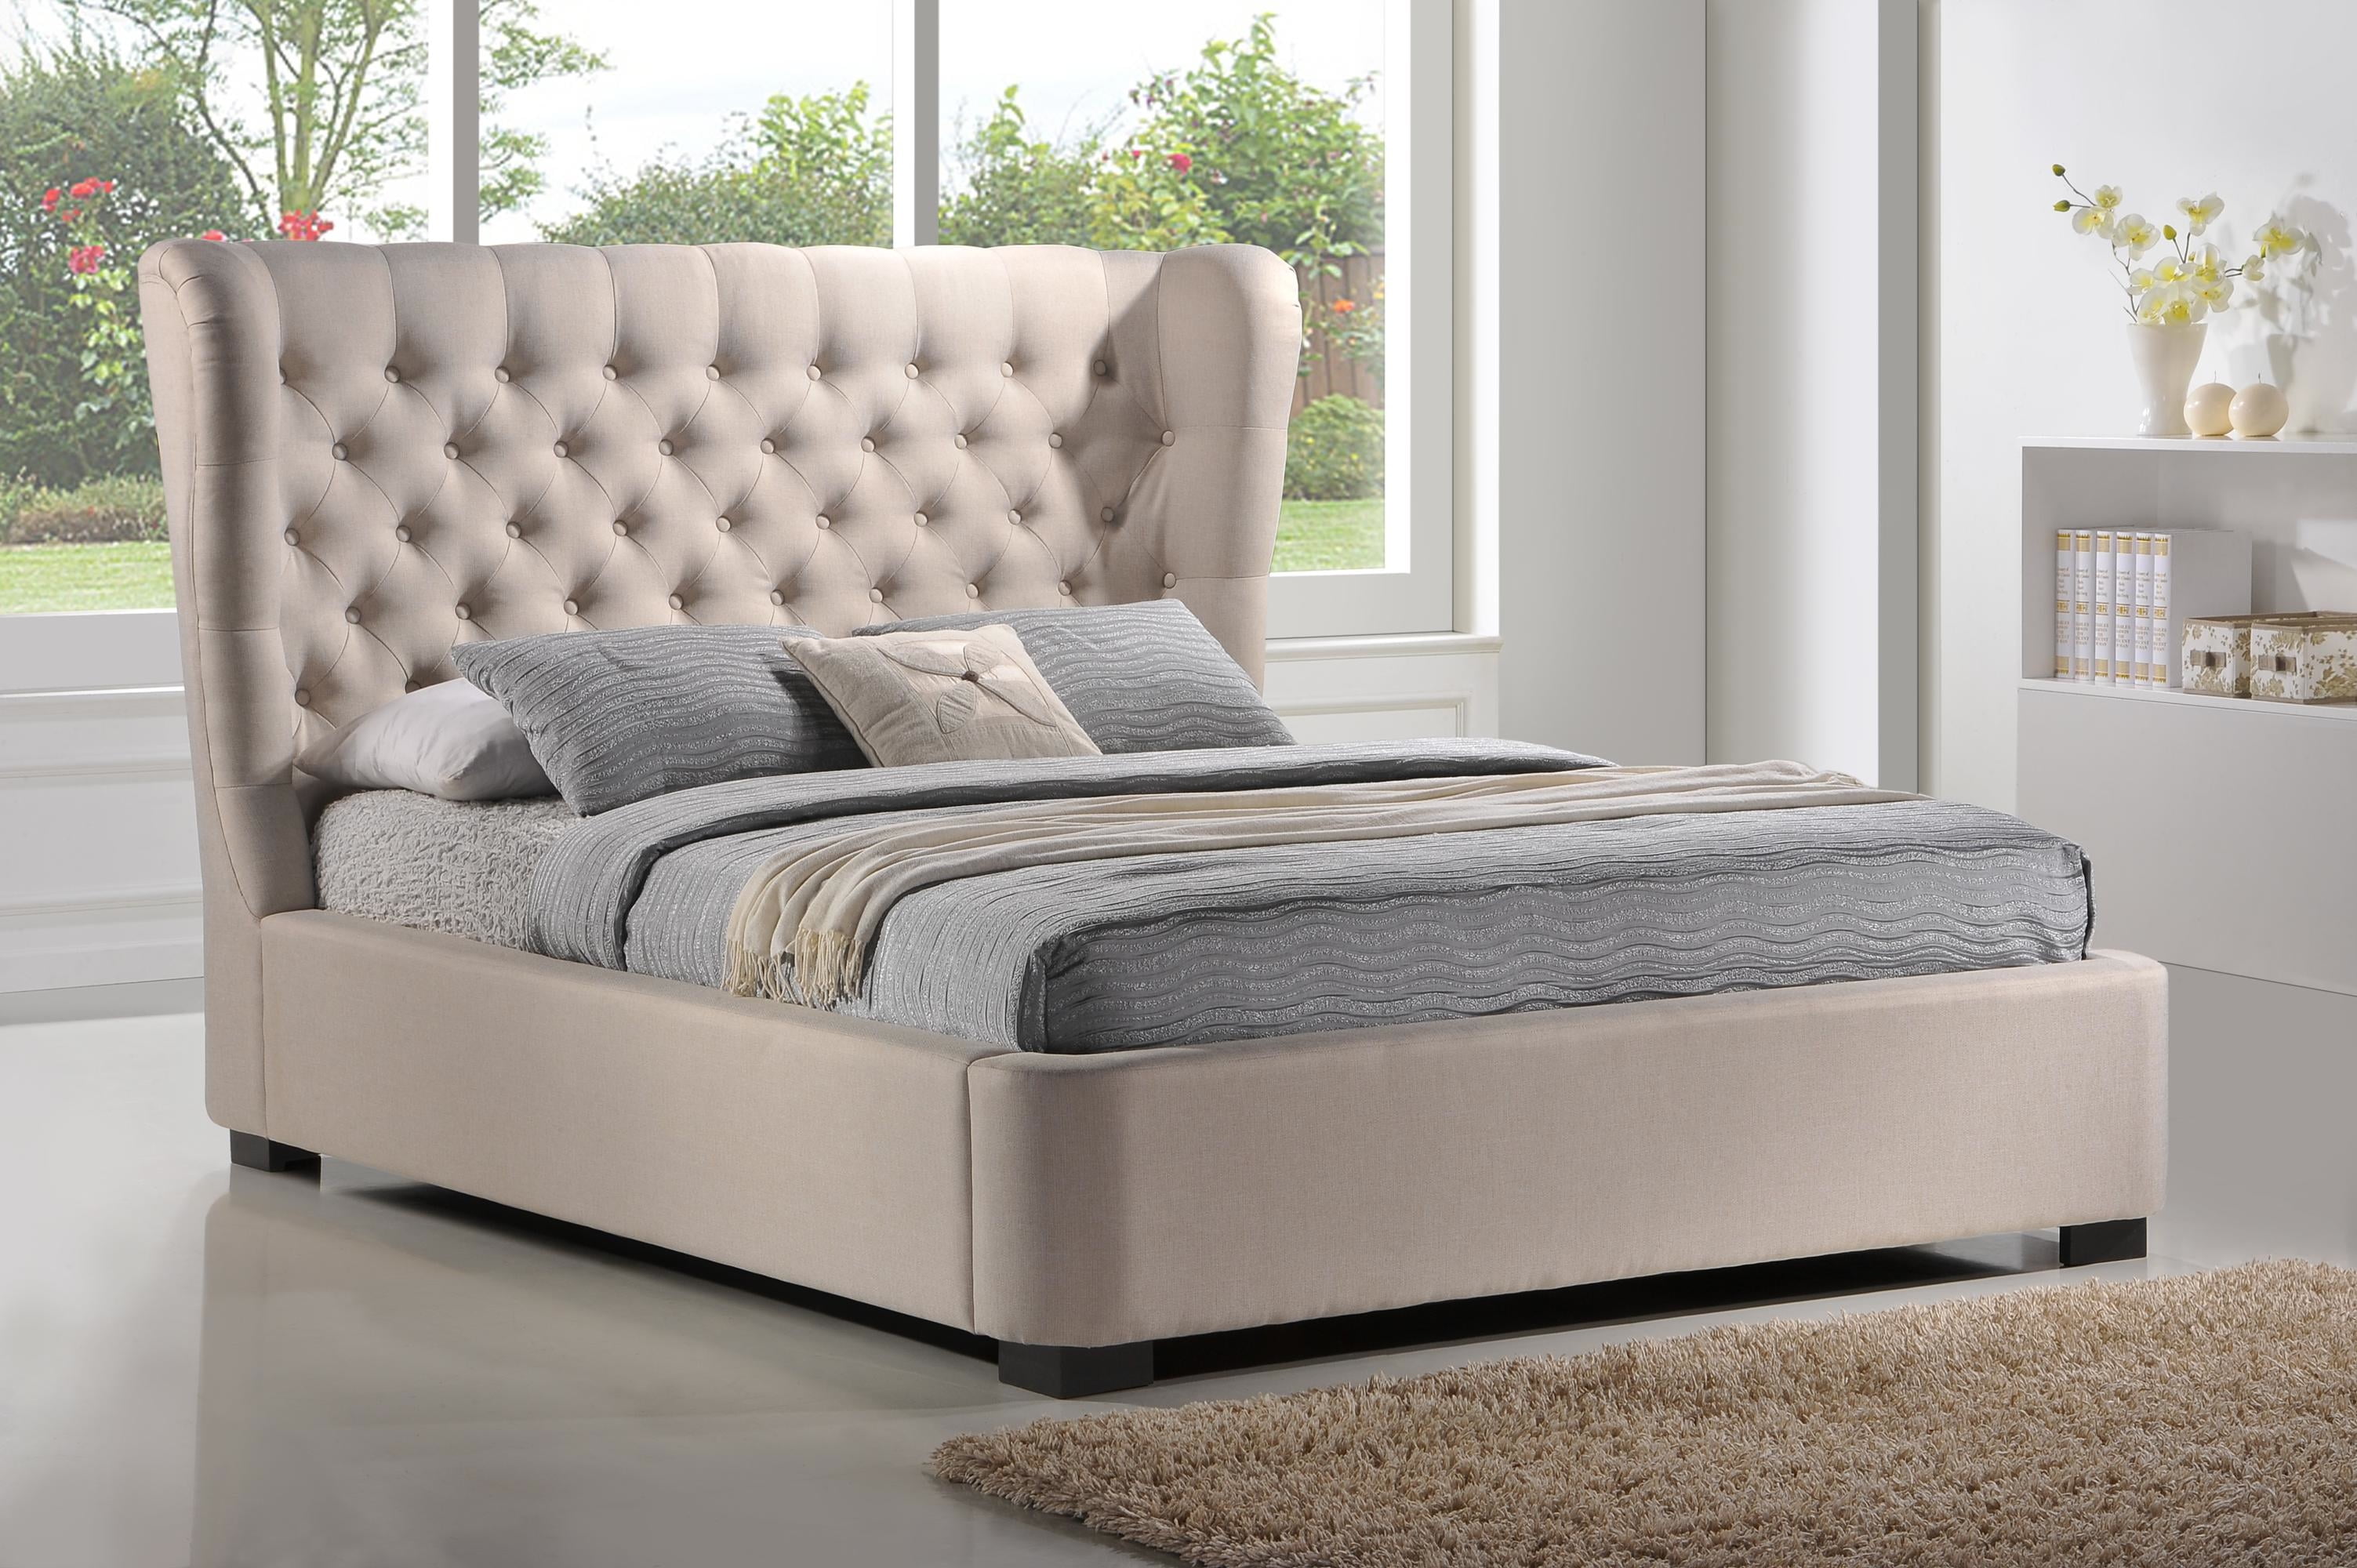 queen size headboard with king size mattress